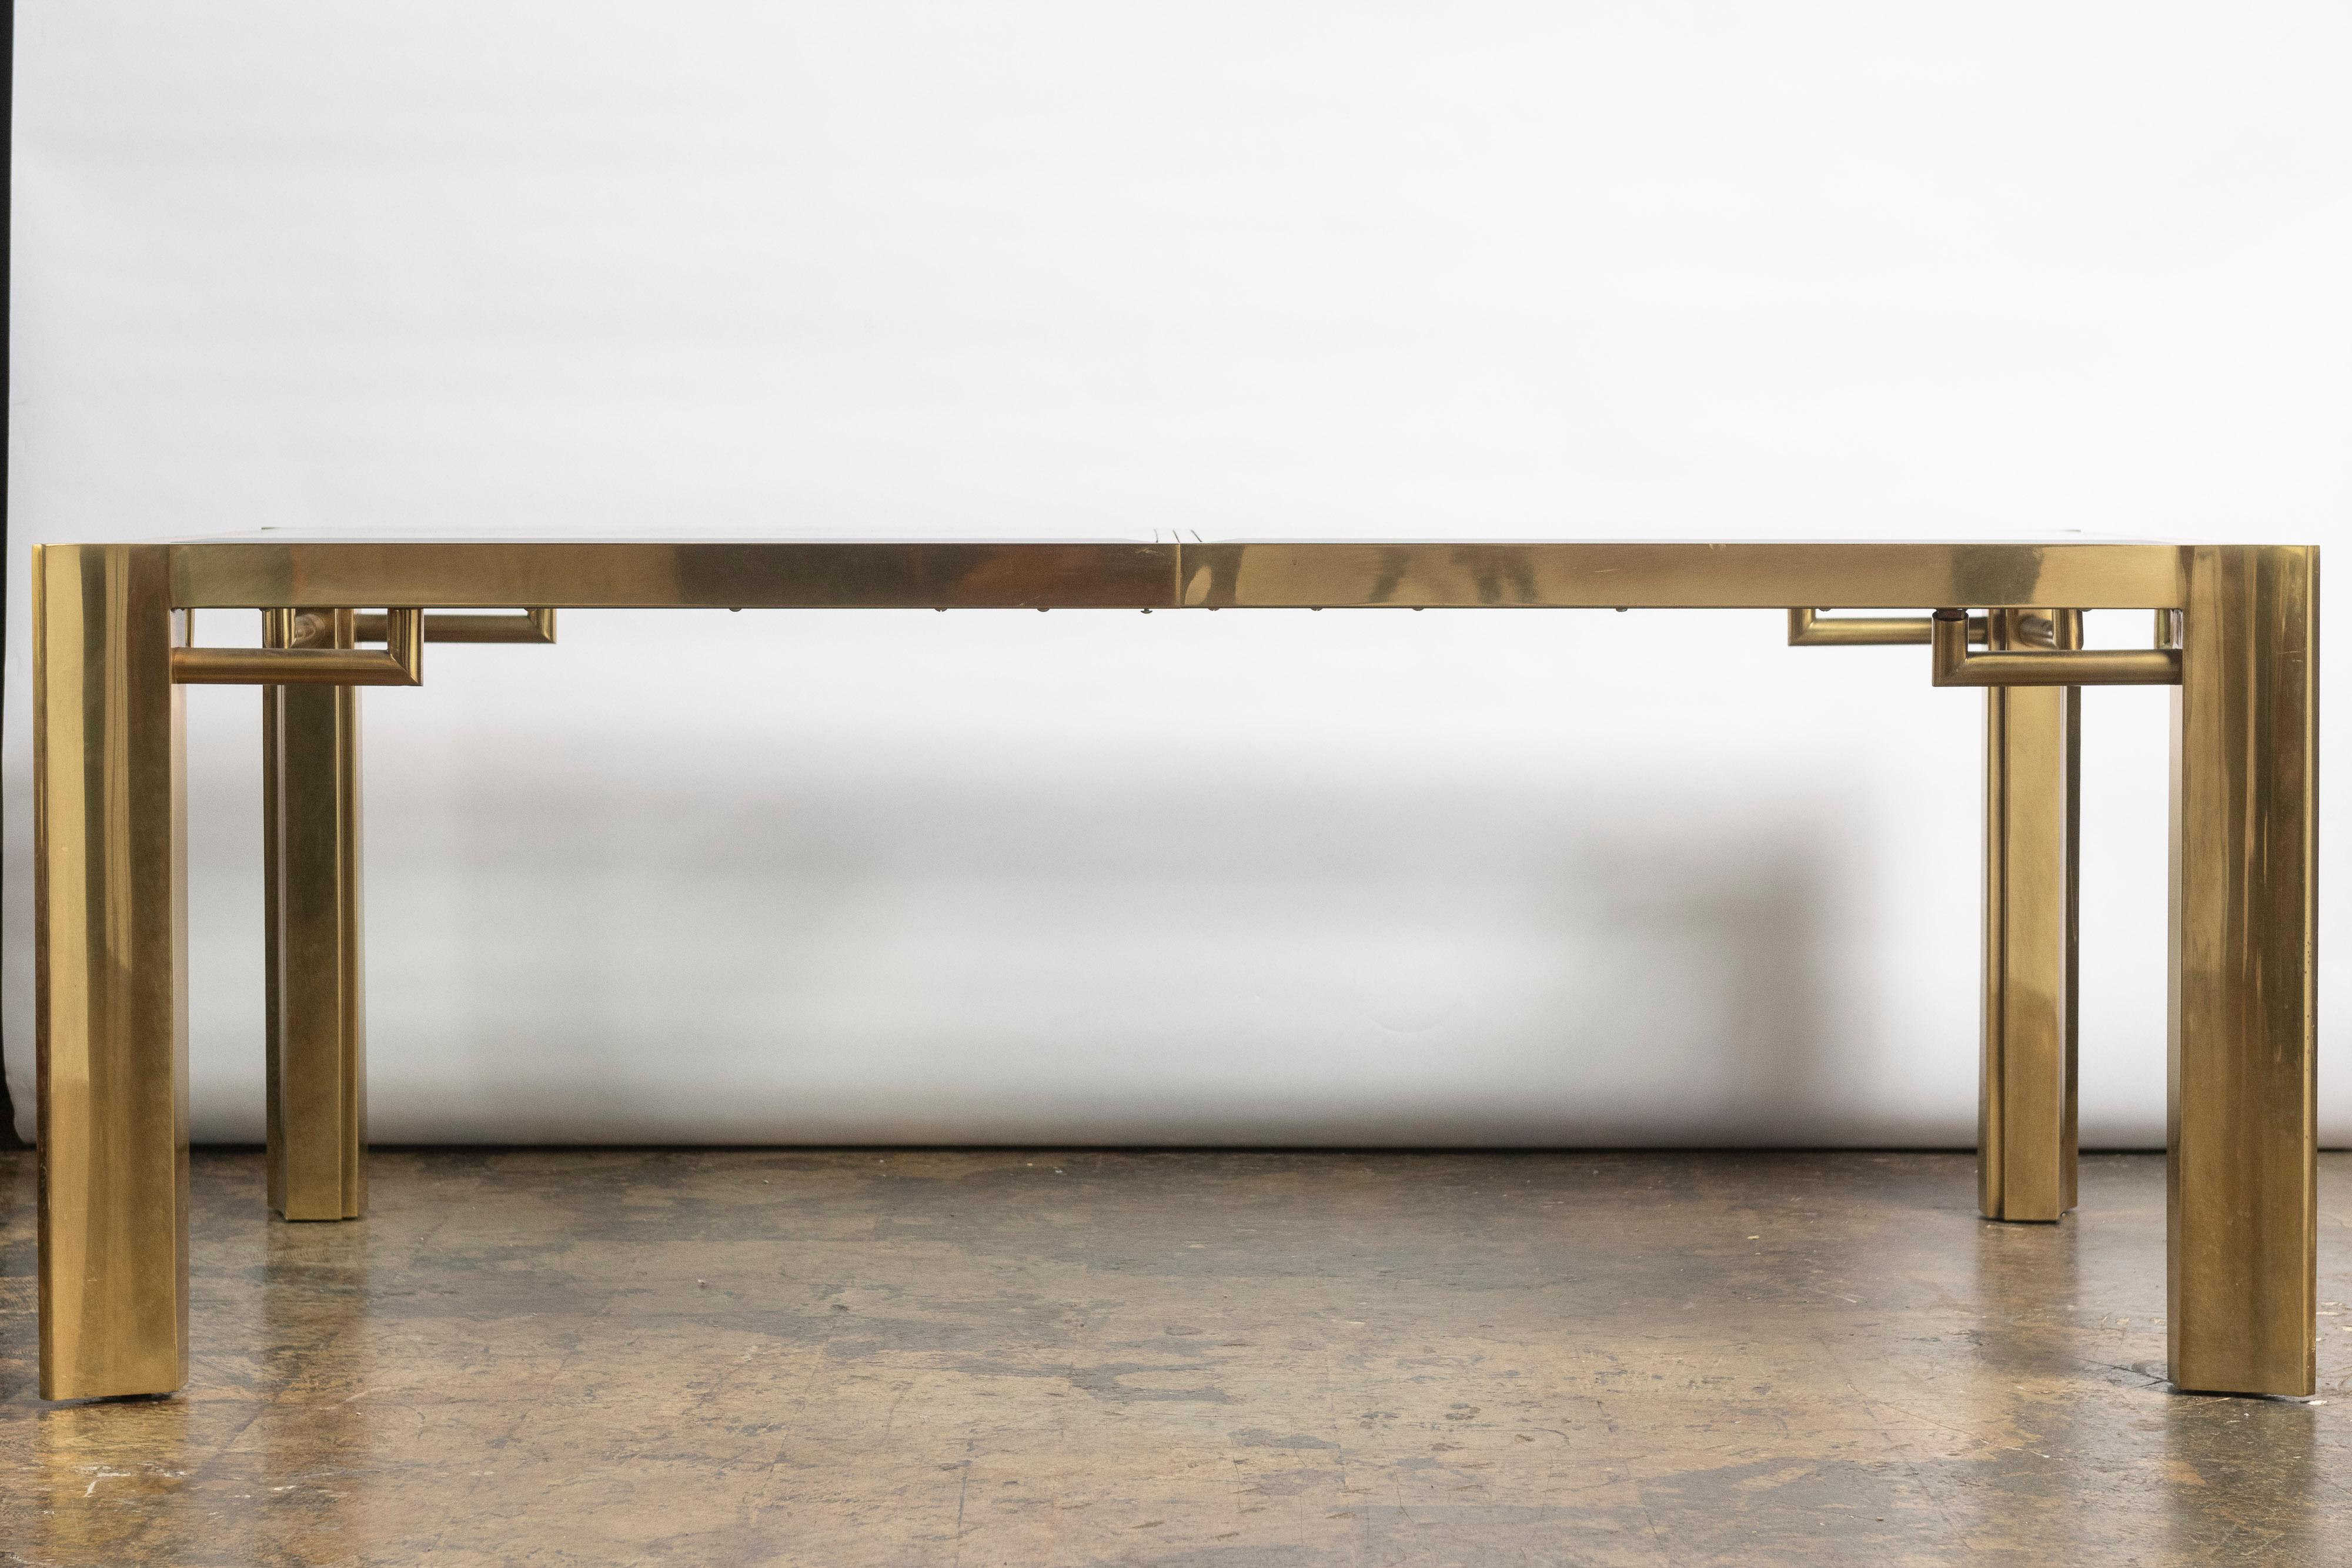 This Mastercraft table is an excellent representation of contemporary design of the 1960-1970s. Made of brass and inset beveled glass, with detailed fretwork on the legs, this vintage dining table is sure to be the place to gather for many a family